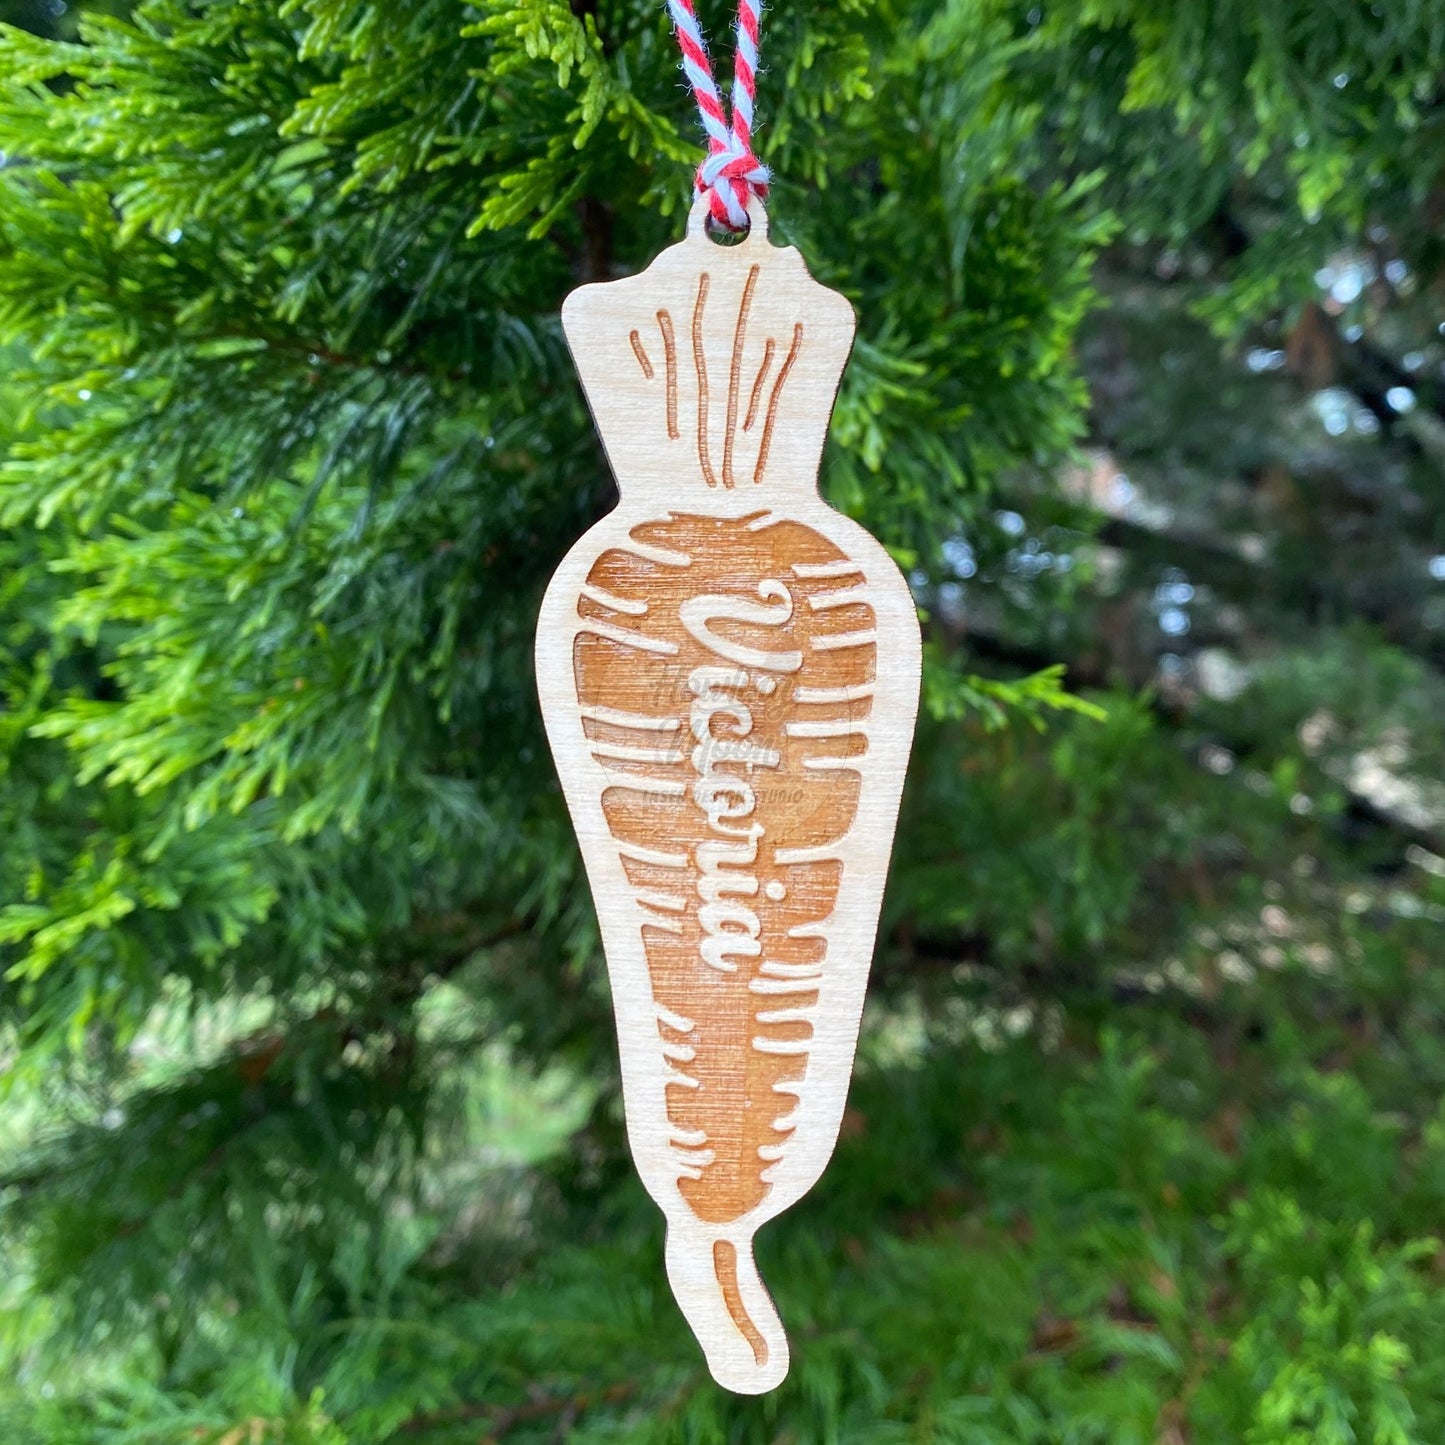 Carrot ornament hanging from tree - made by Howling Moon Laser Design in Virginia, USA